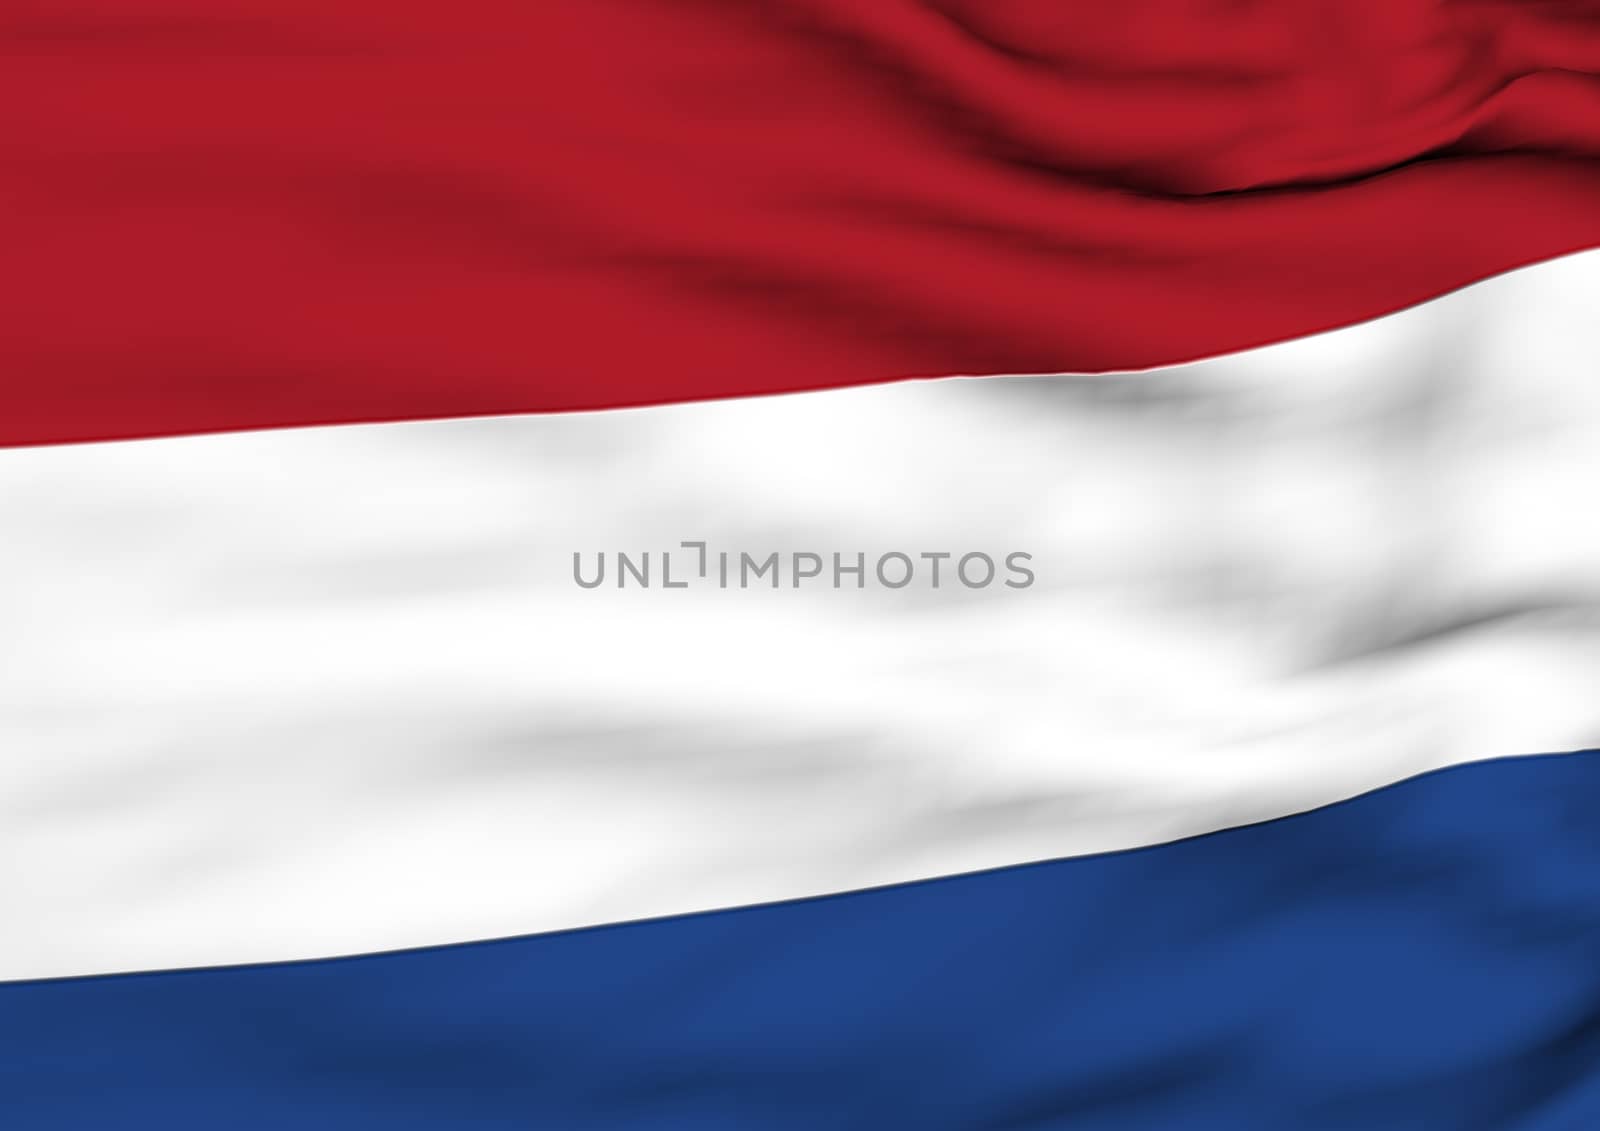 Image of a flag of Netherlands by richter1910